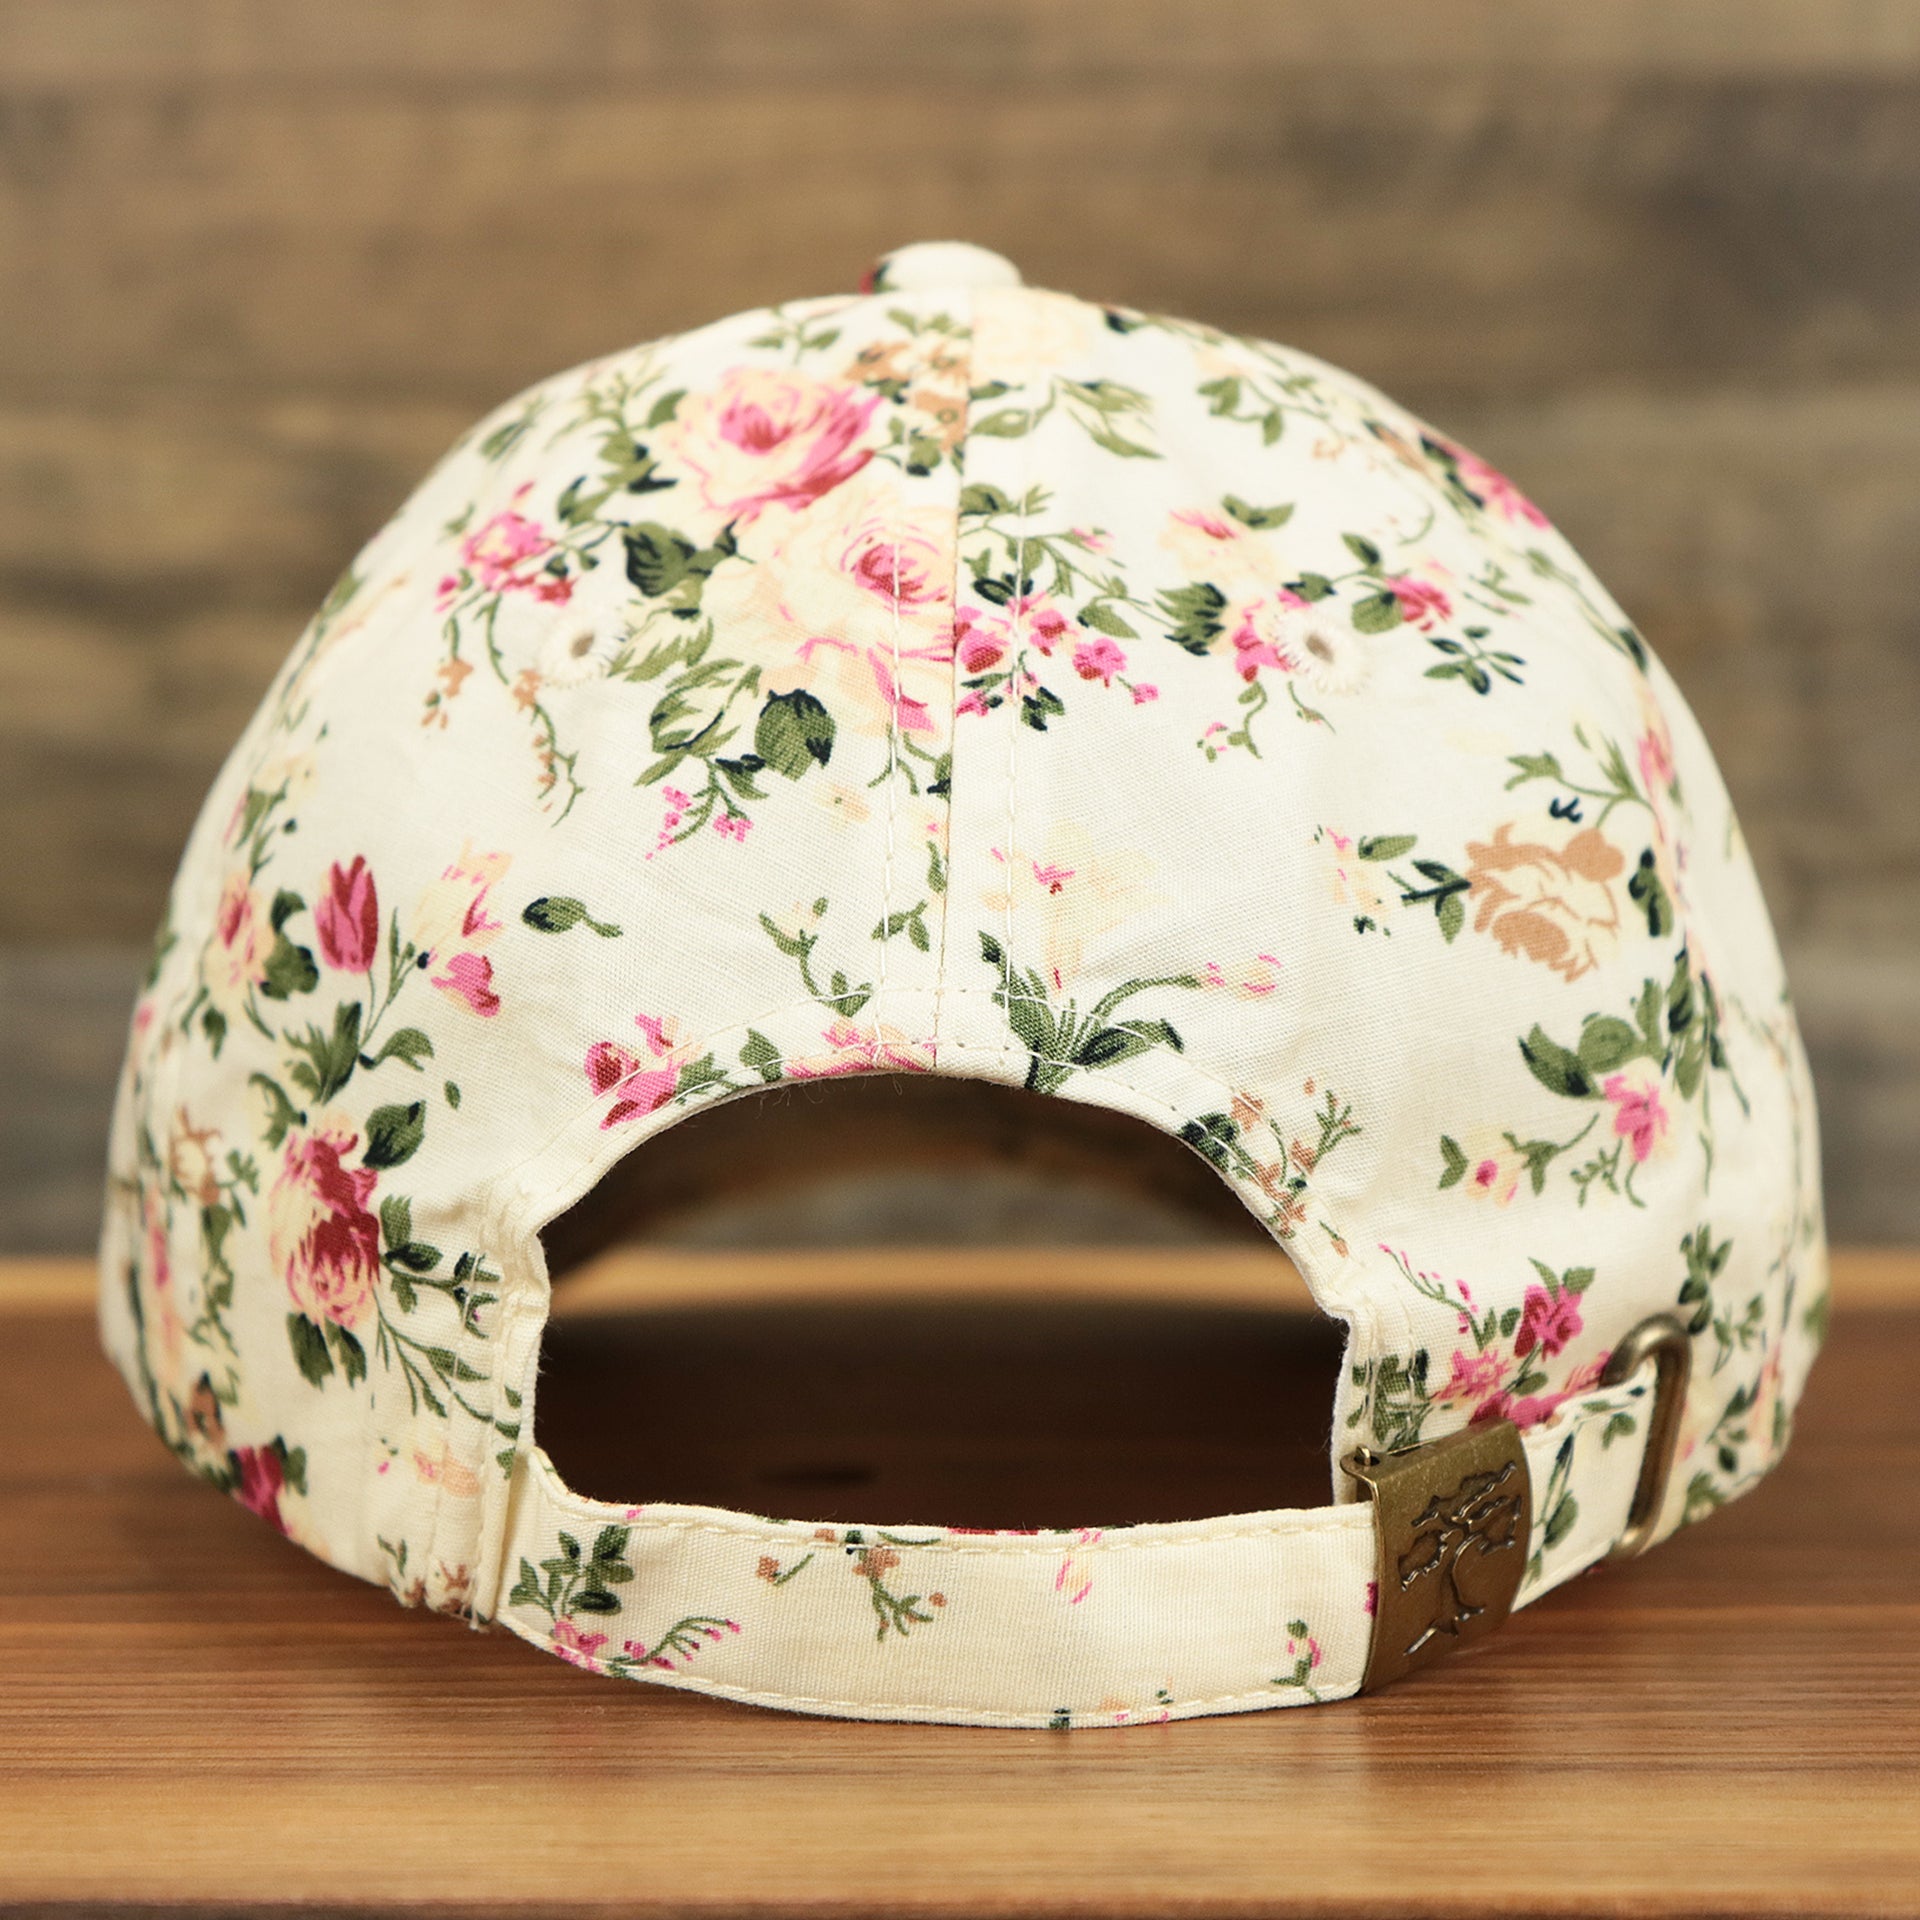 The backside of the Kid’s Floral Print Blank Adjustable Baseball Hat | Youth Cream Dad Hat